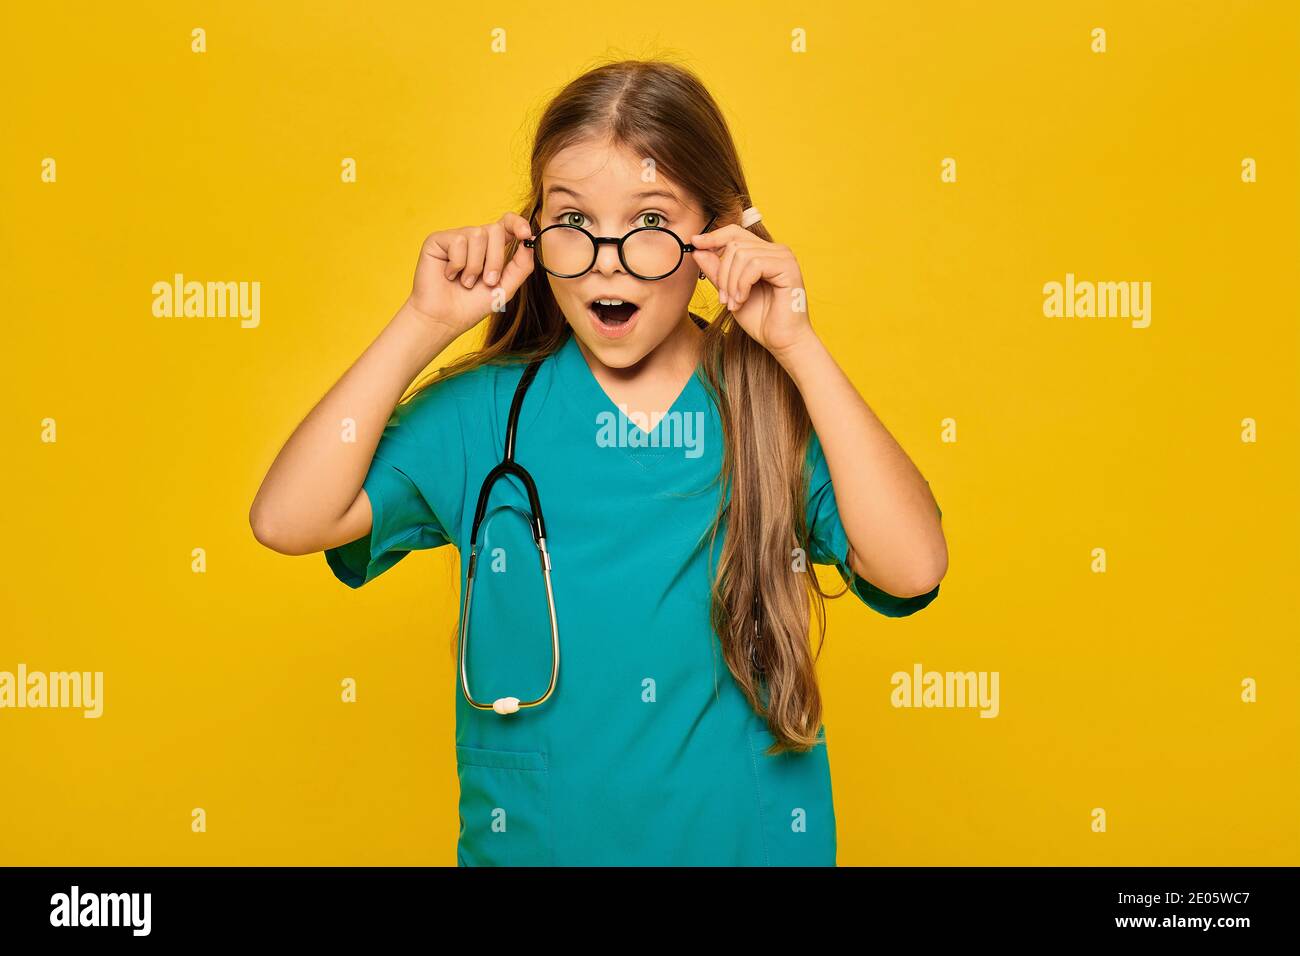 Child wearing in a blue surgical uniform and a stethoscope playing the medical profession, and shows on her face emotion of surprise, taking off glass Stock Photo